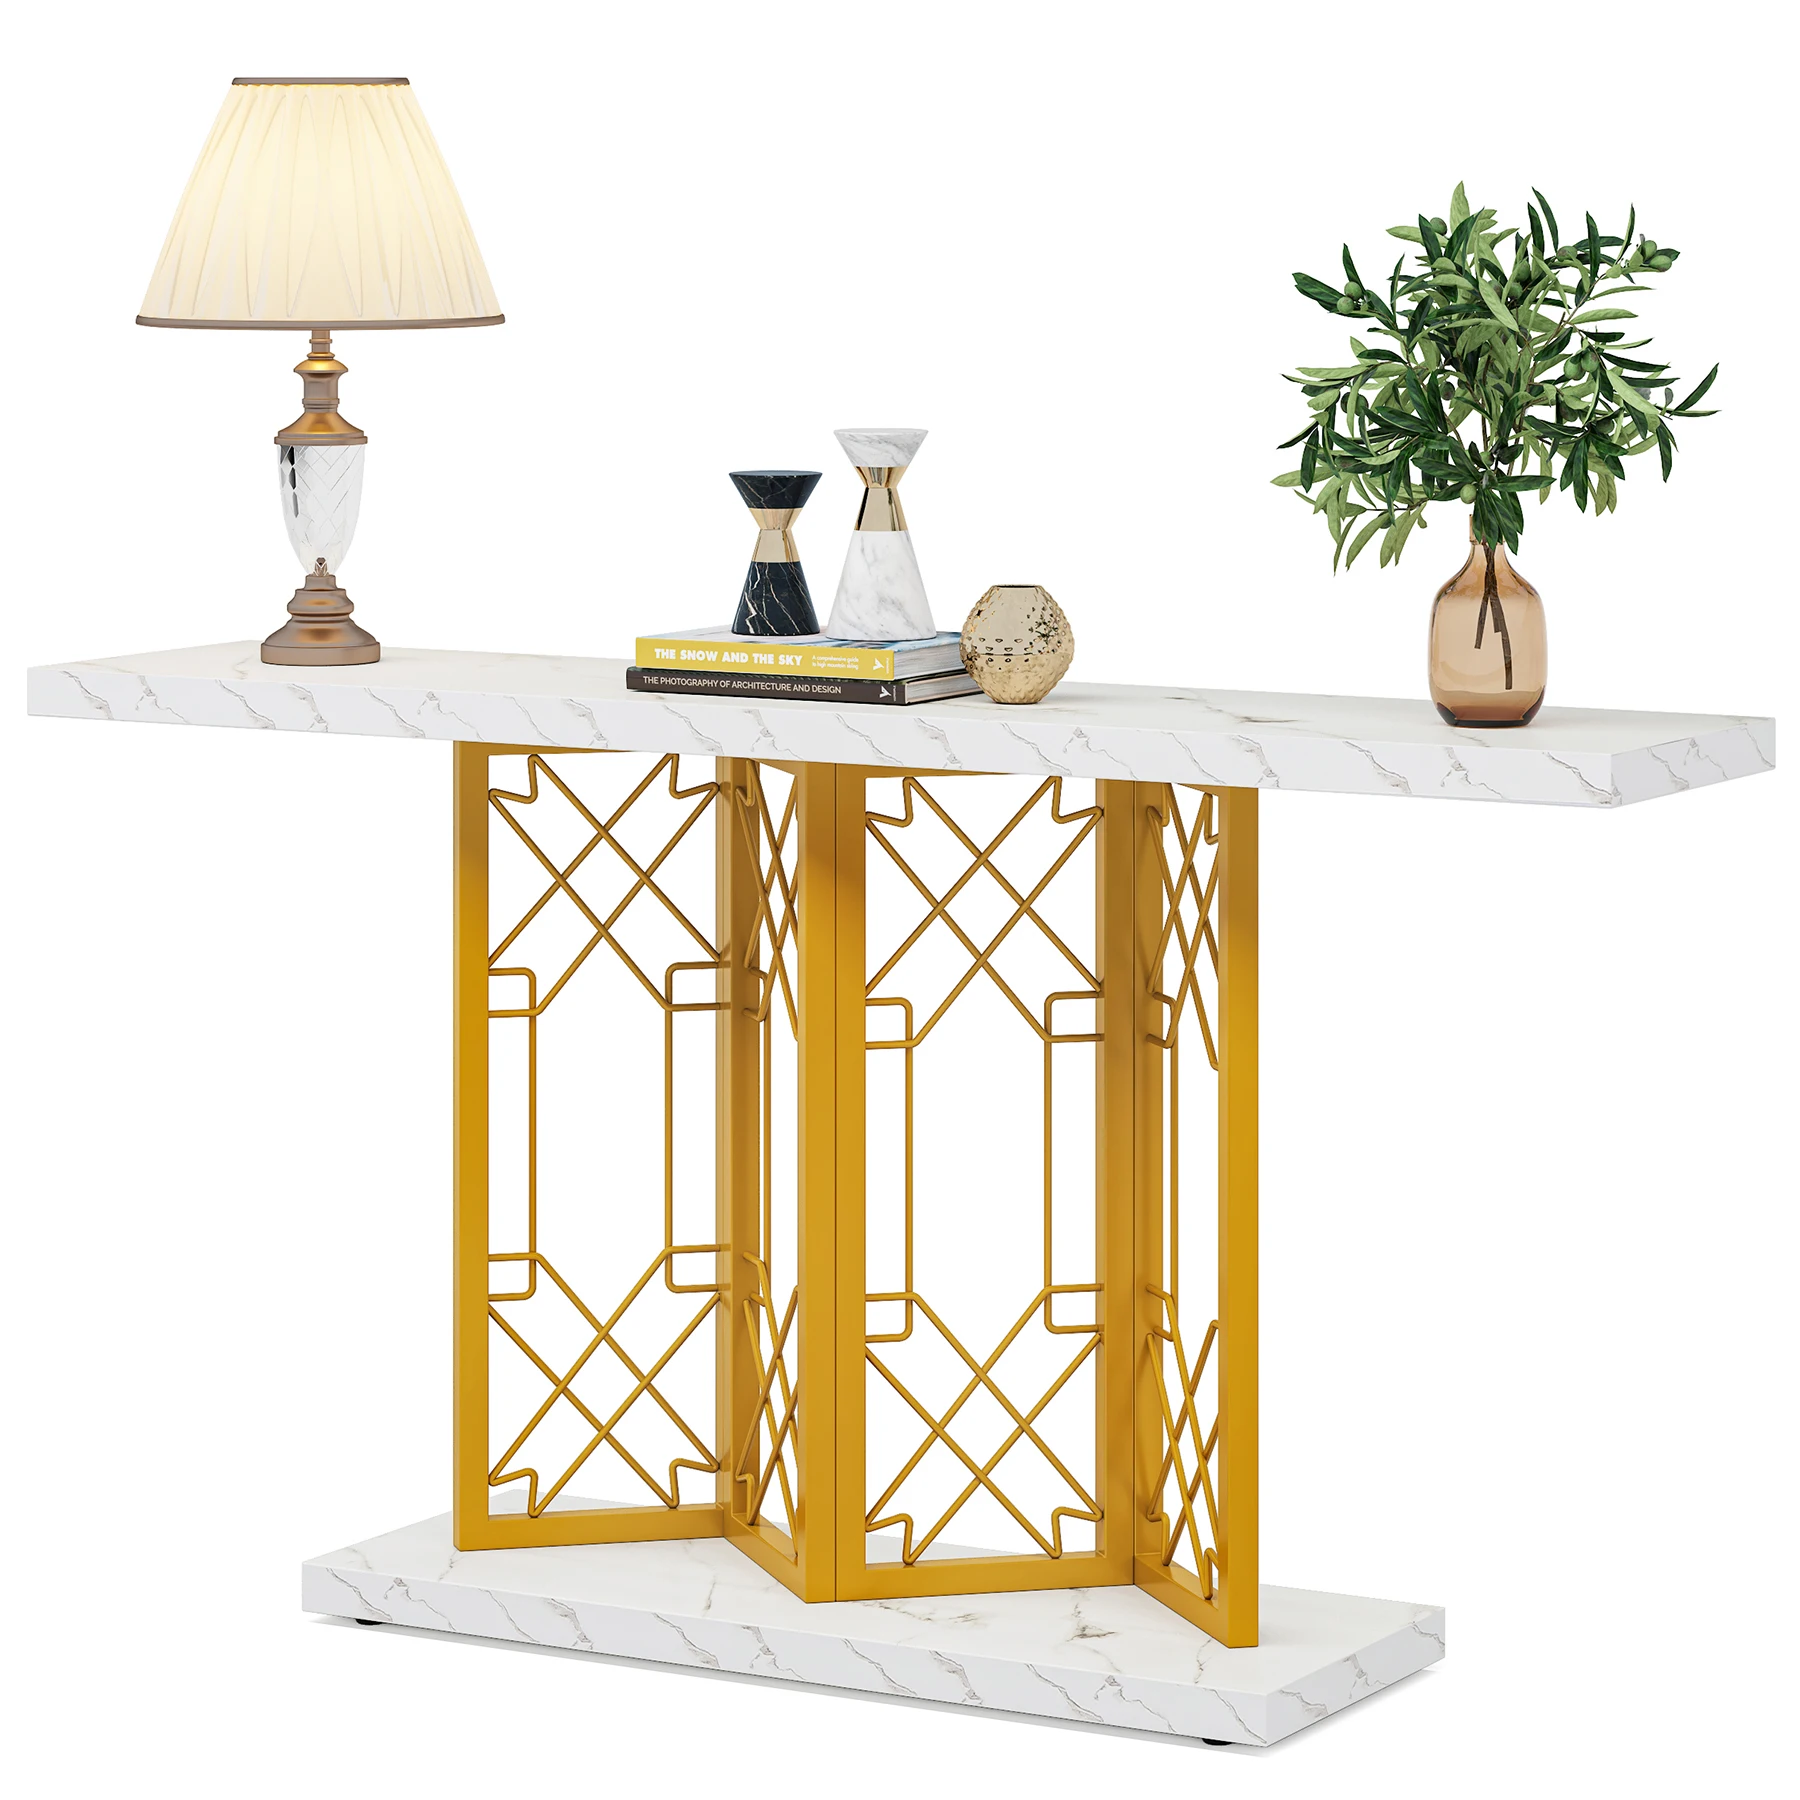 Home Decor Morden Gold Luxury Console Tables Wooden Center Table For The Living Room